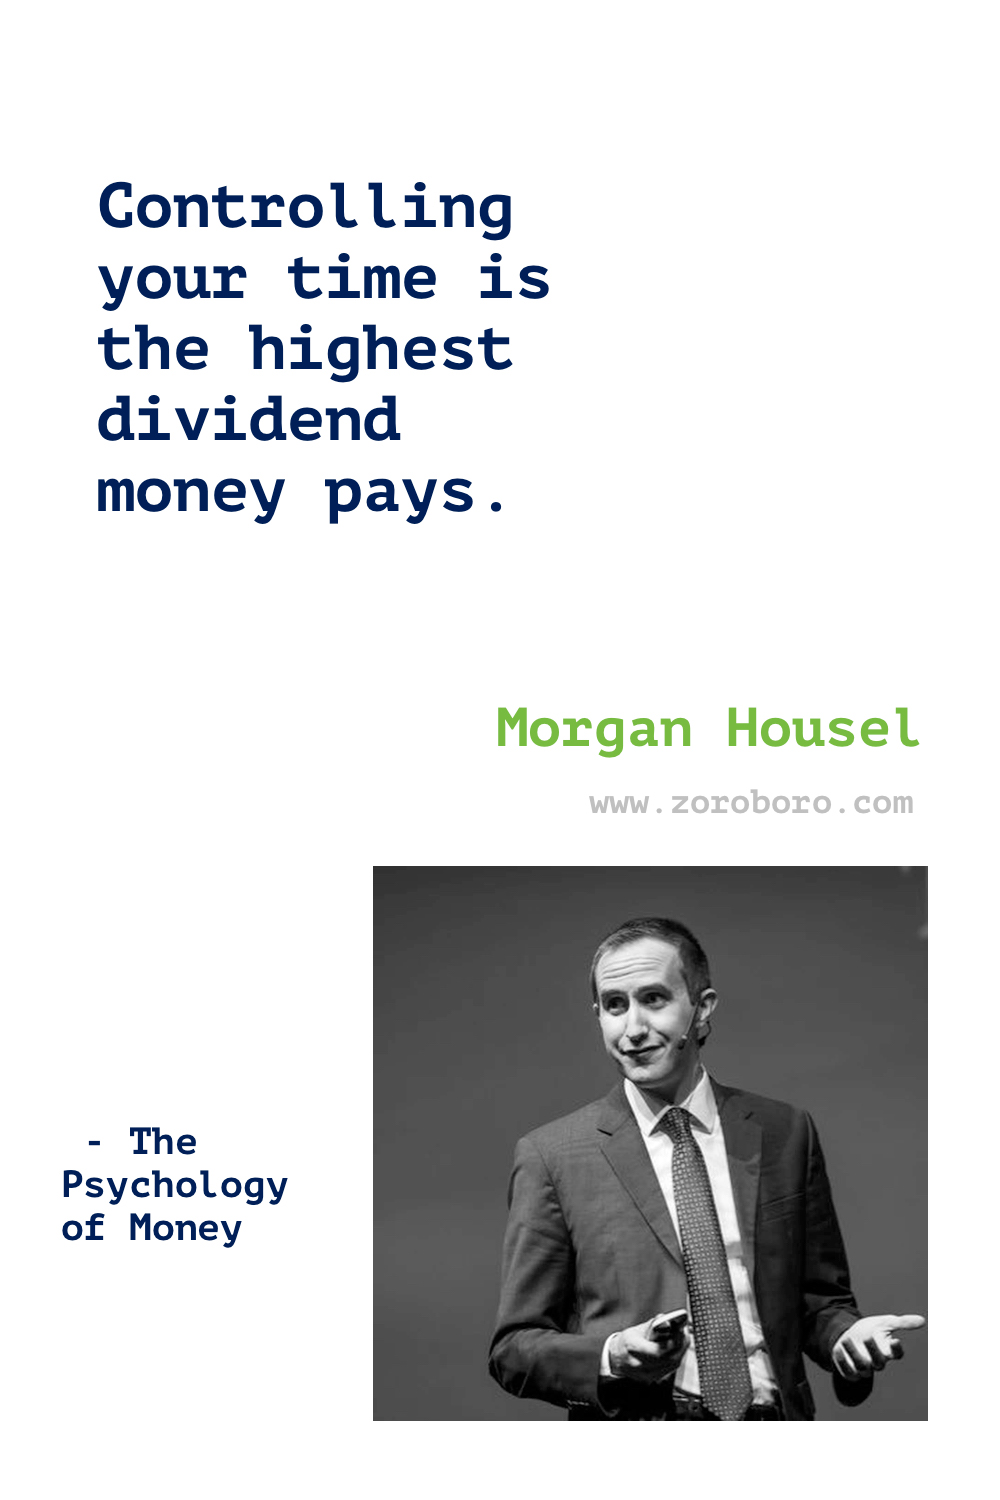 Morgan Housel Quotes, The Psychology of Money Quotes, wealth, greed, and happiness Quotes, Morgan Housel Books Quotes, Morgan Housel Quotes On Money.